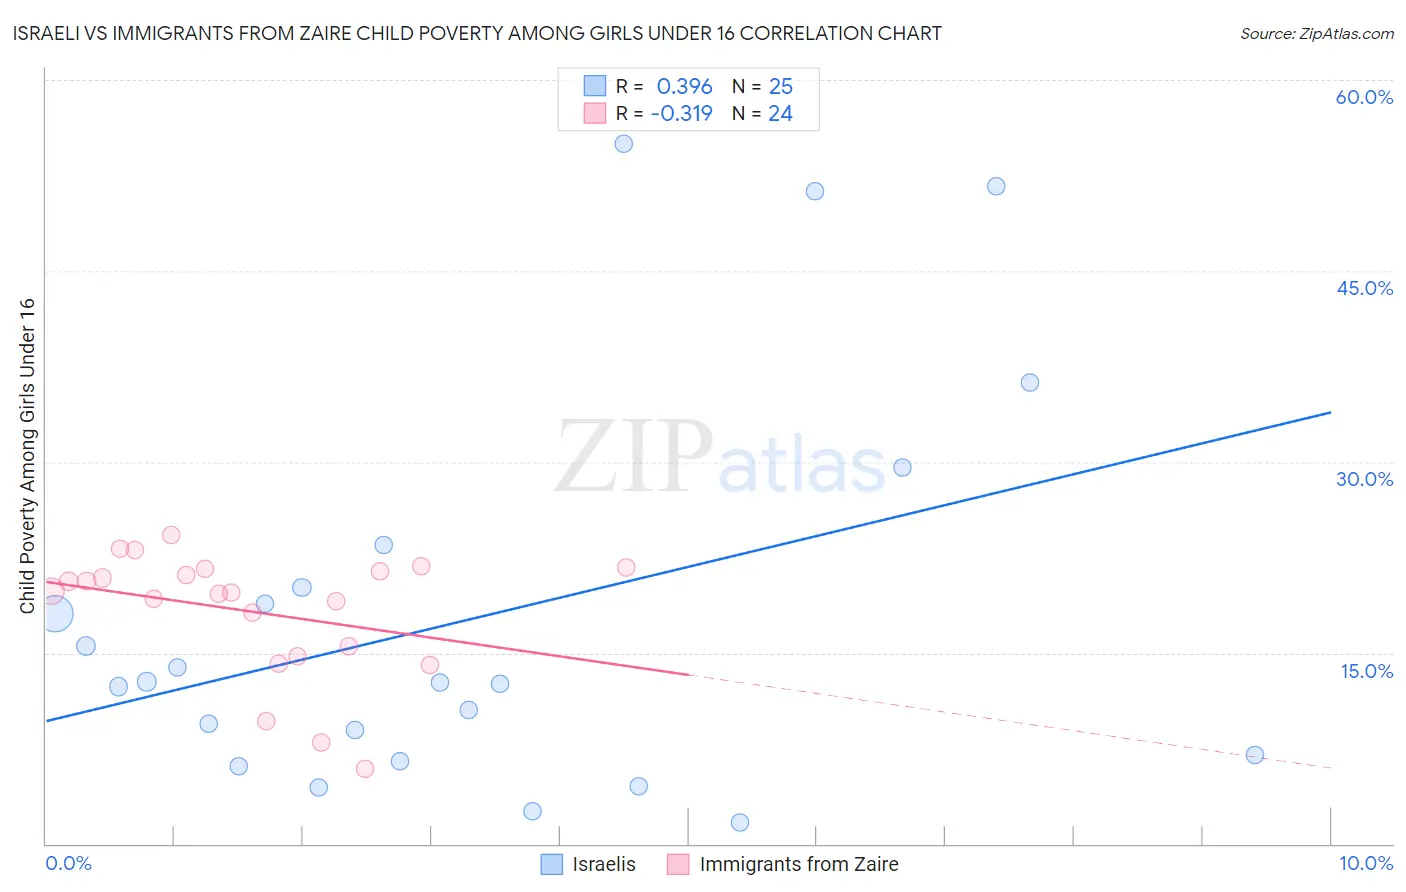 Israeli vs Immigrants from Zaire Child Poverty Among Girls Under 16